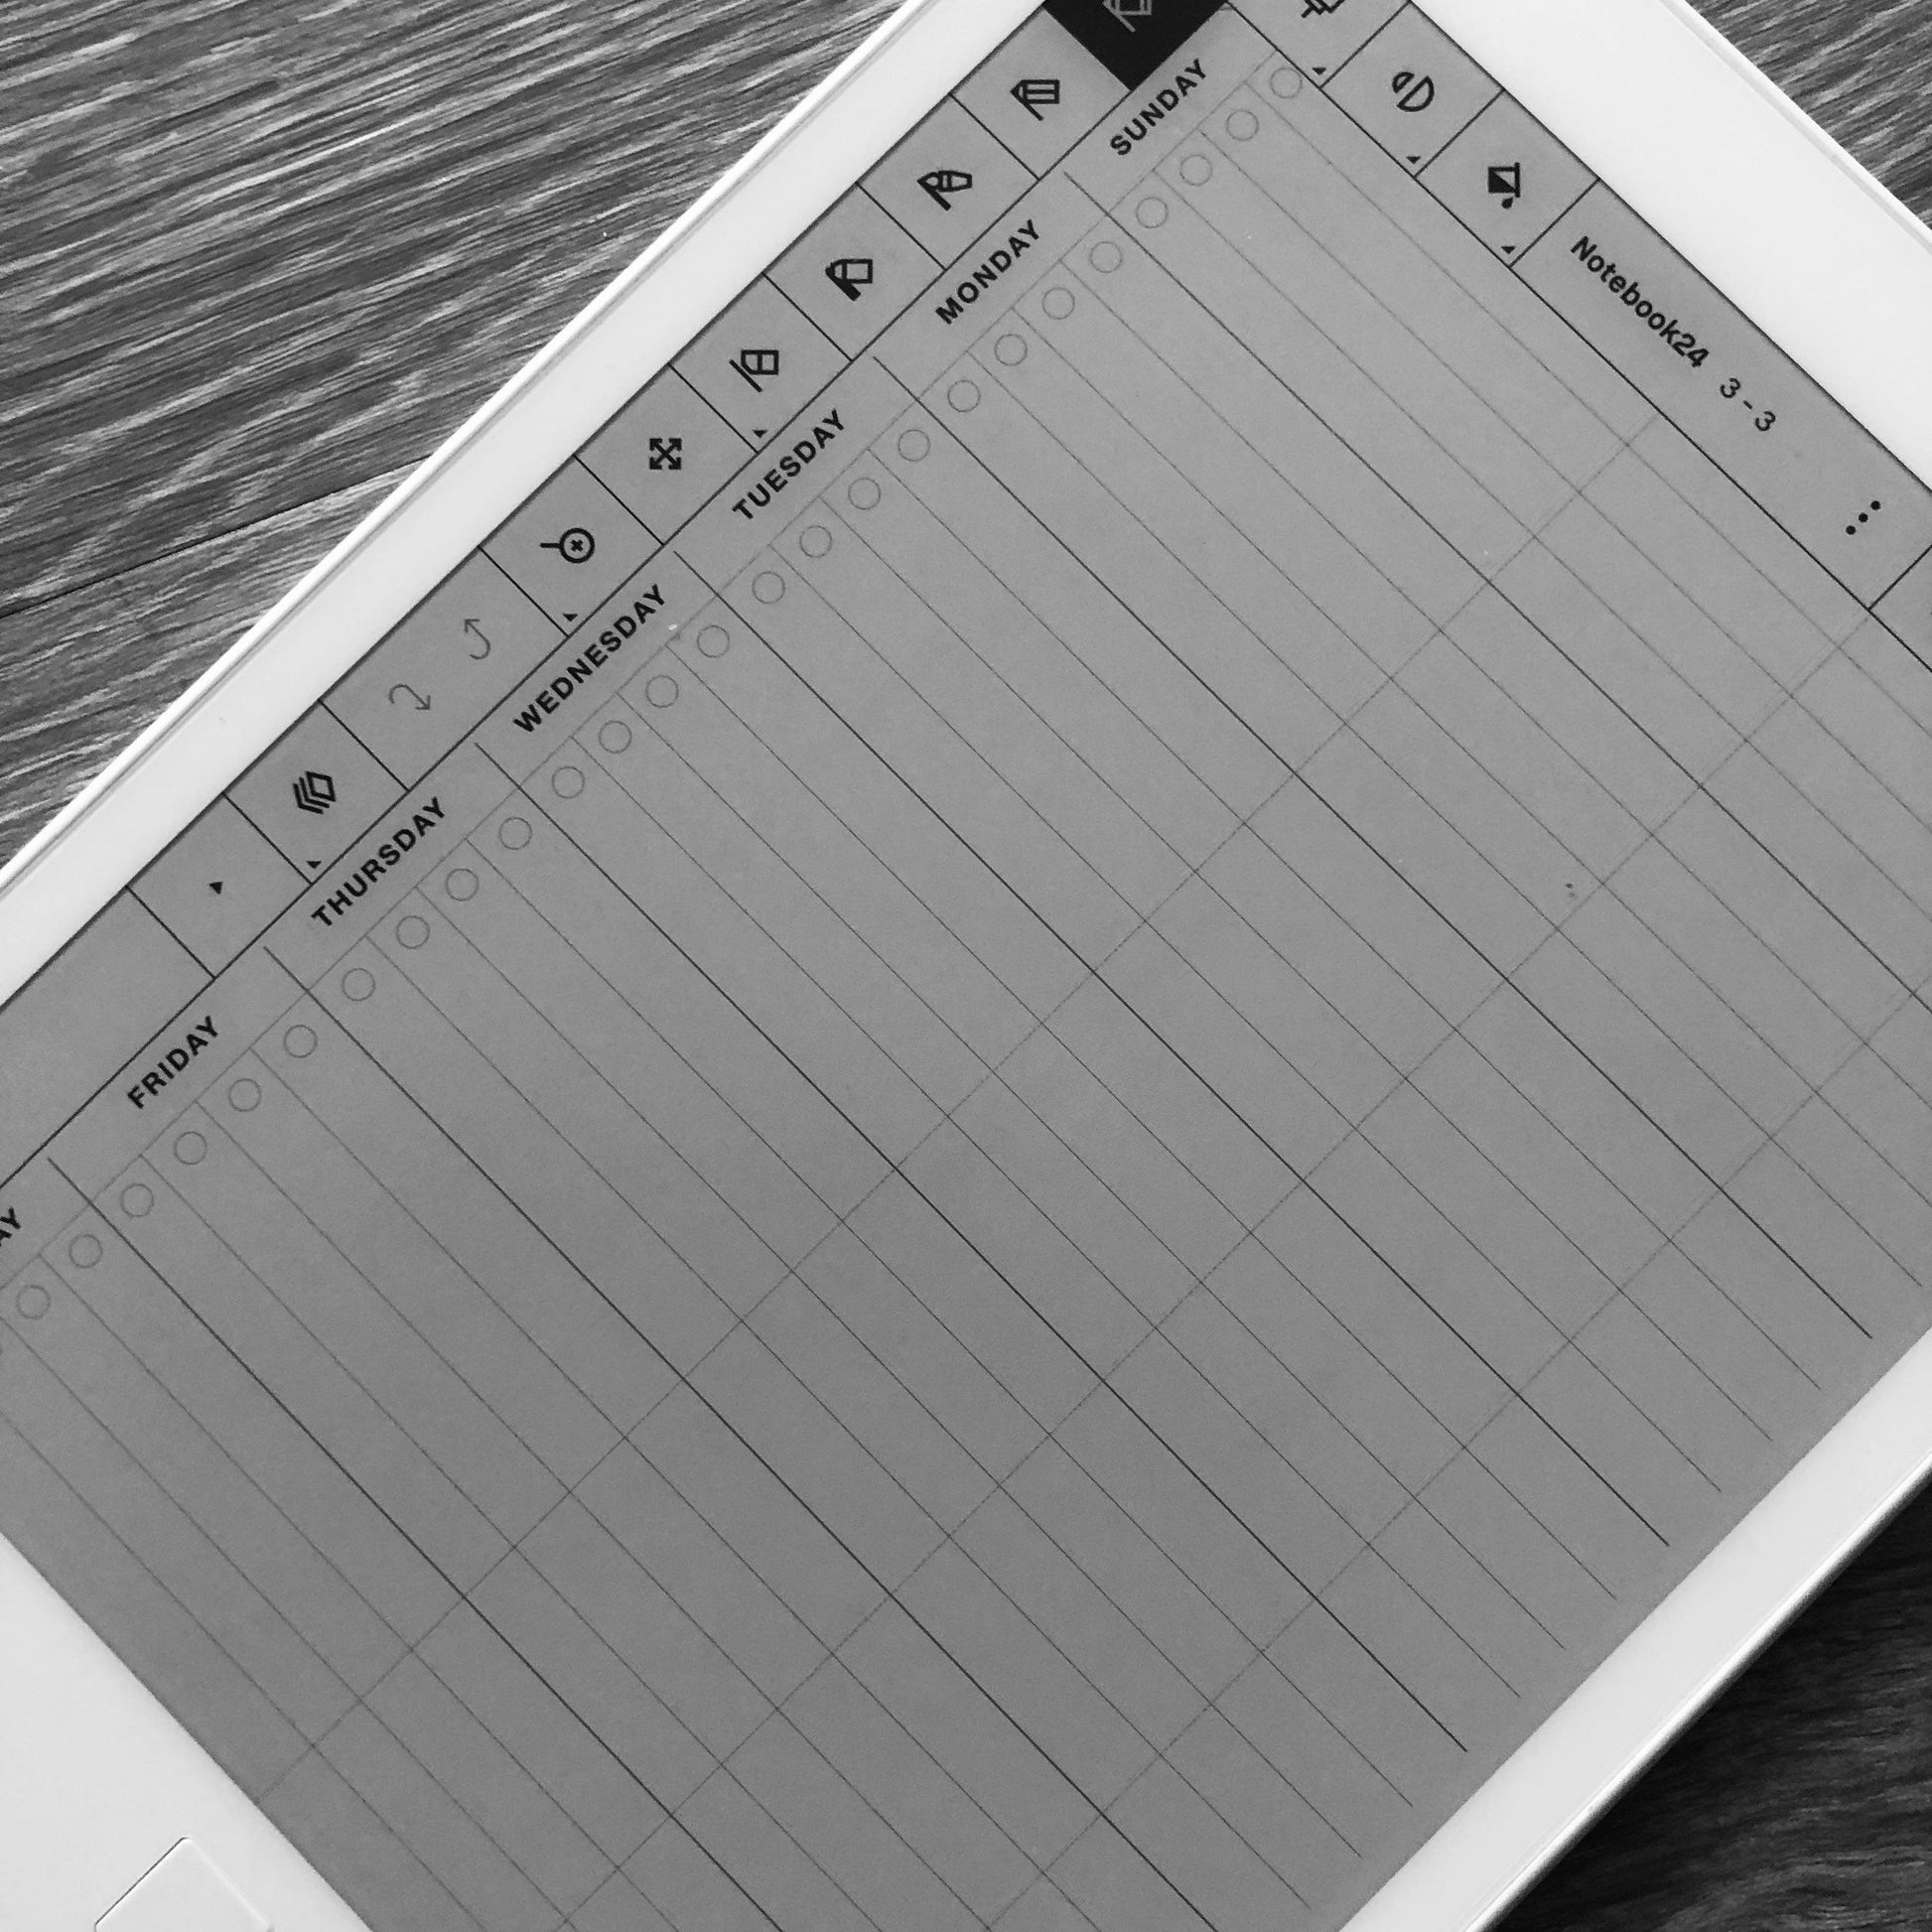 Weekly Workout Log - Einkpads - reMarkable Templates